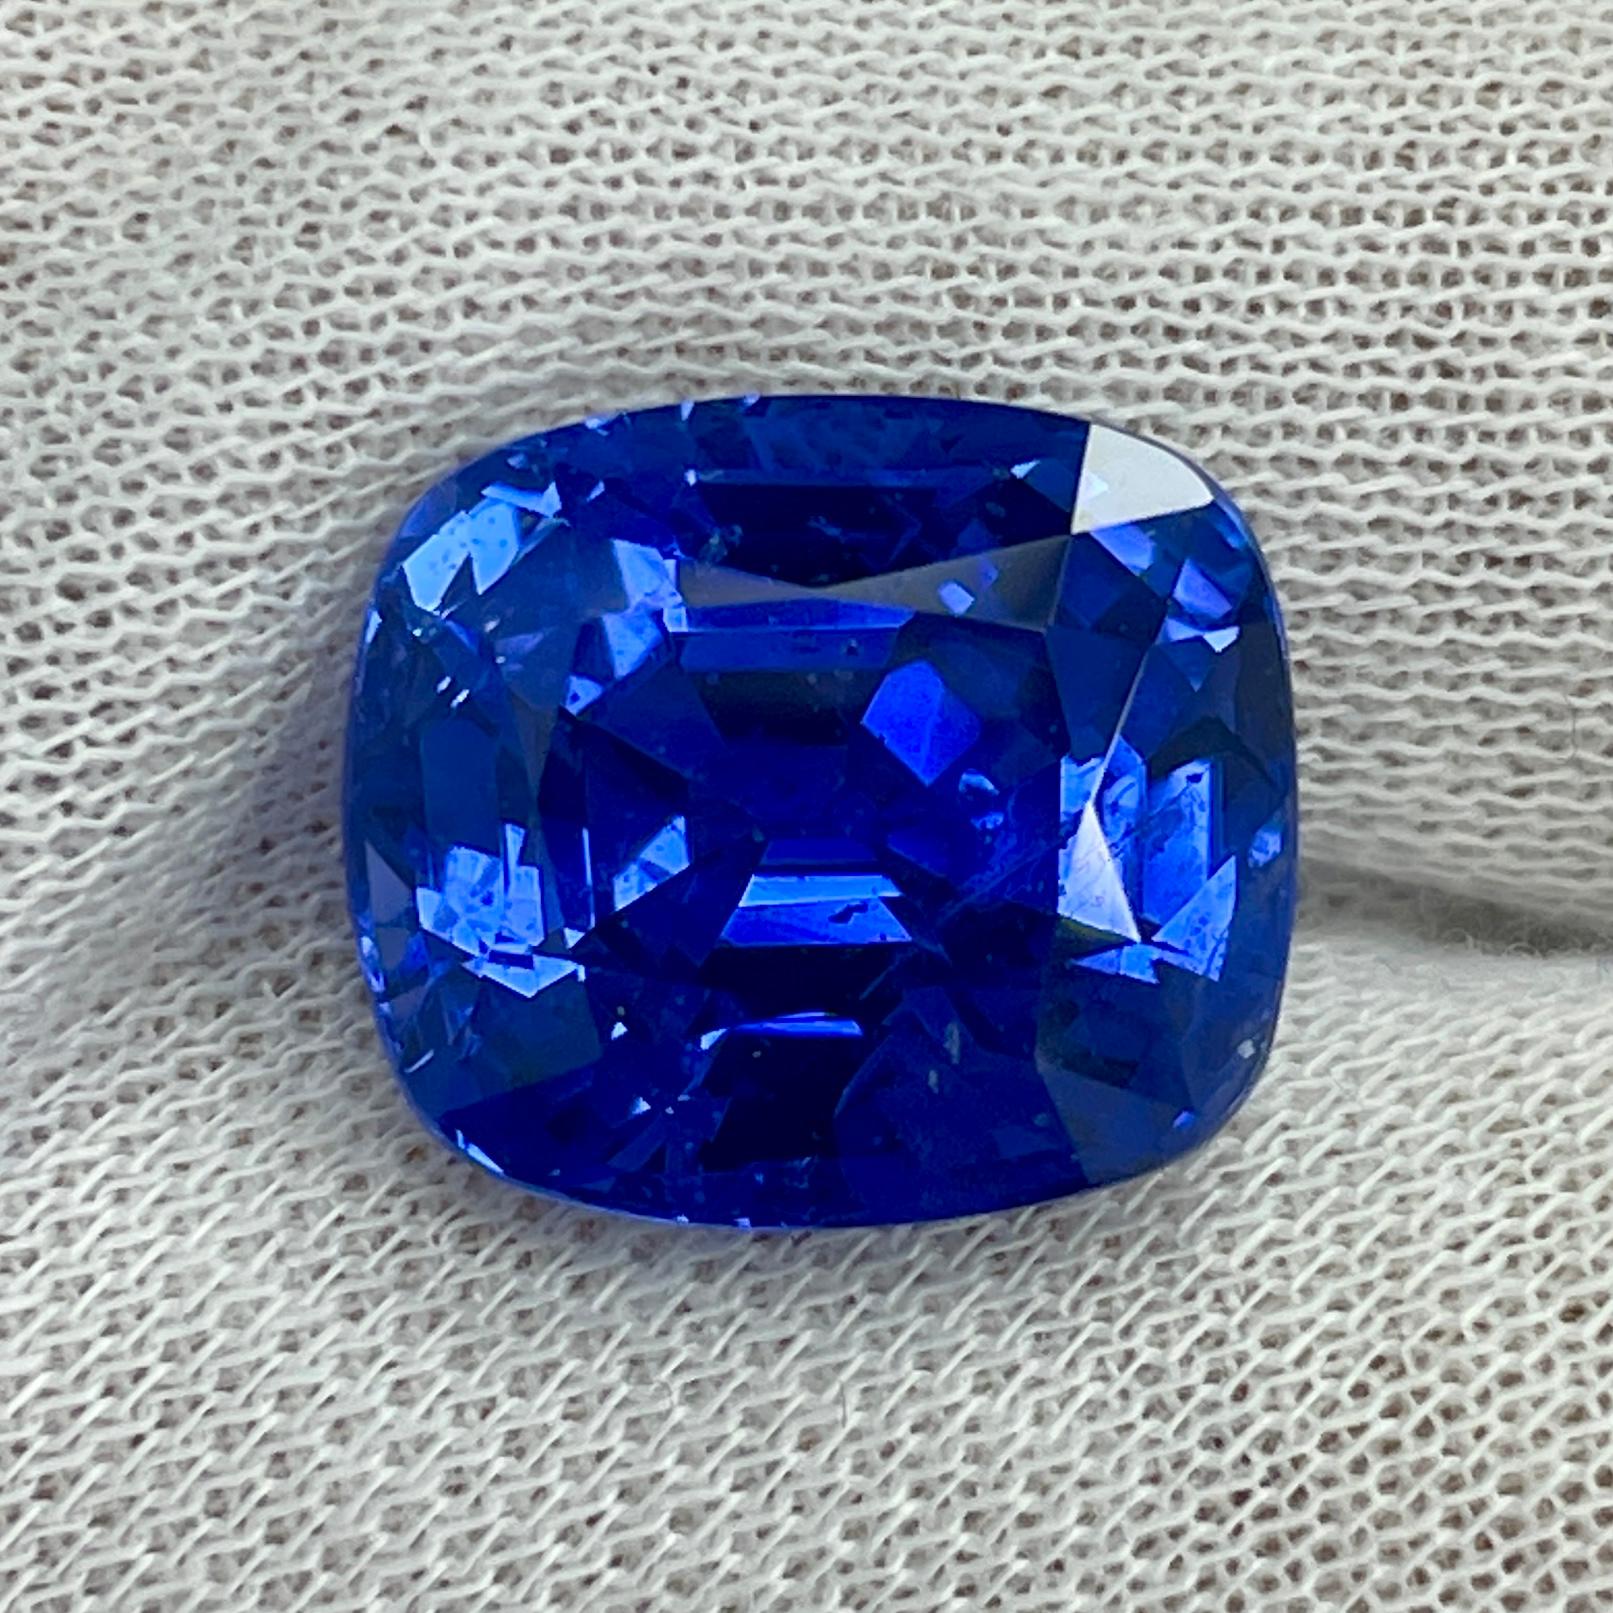 An AGL and CDC certified lively blue, Sri Lankan none treated cushion sapphire. This stone is very saturated and radiates! Will look beautiful in any jewelry!
We can help you make your dream jewelry piece with this. 